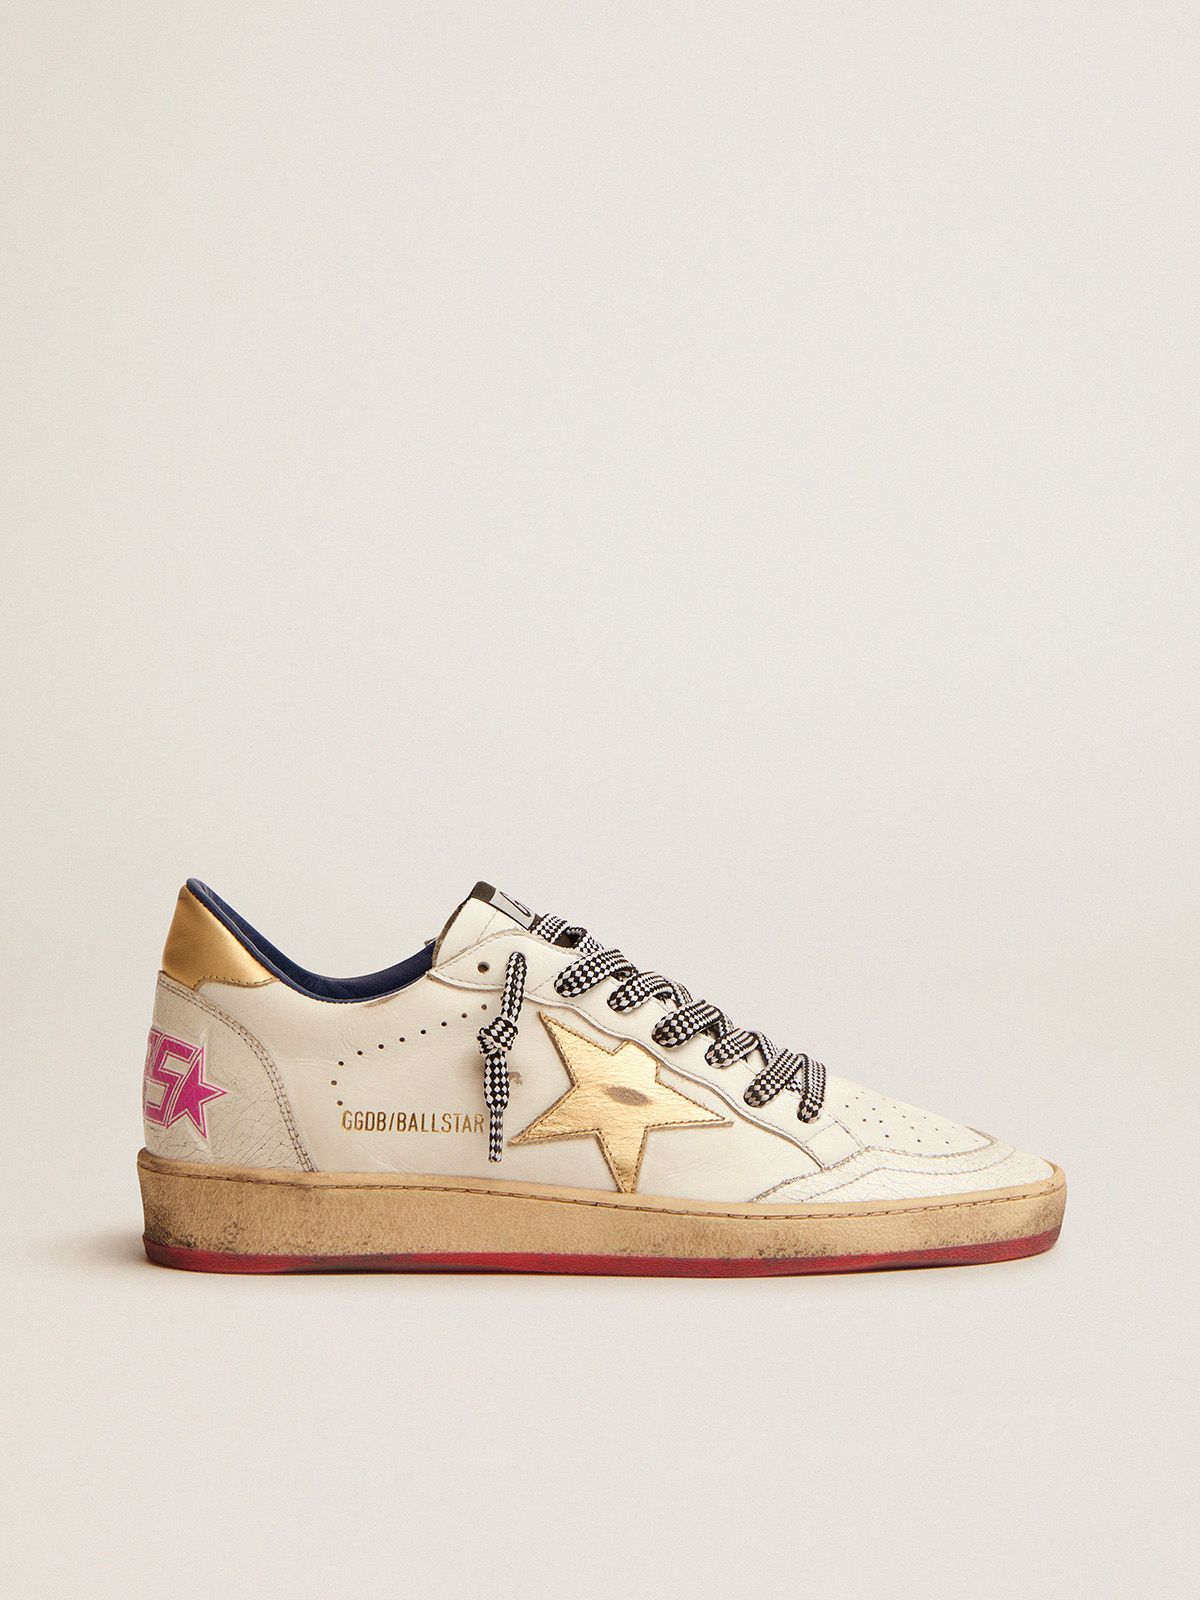 Ball Star LTD sneakers in white leather with gold laminated leather inserts